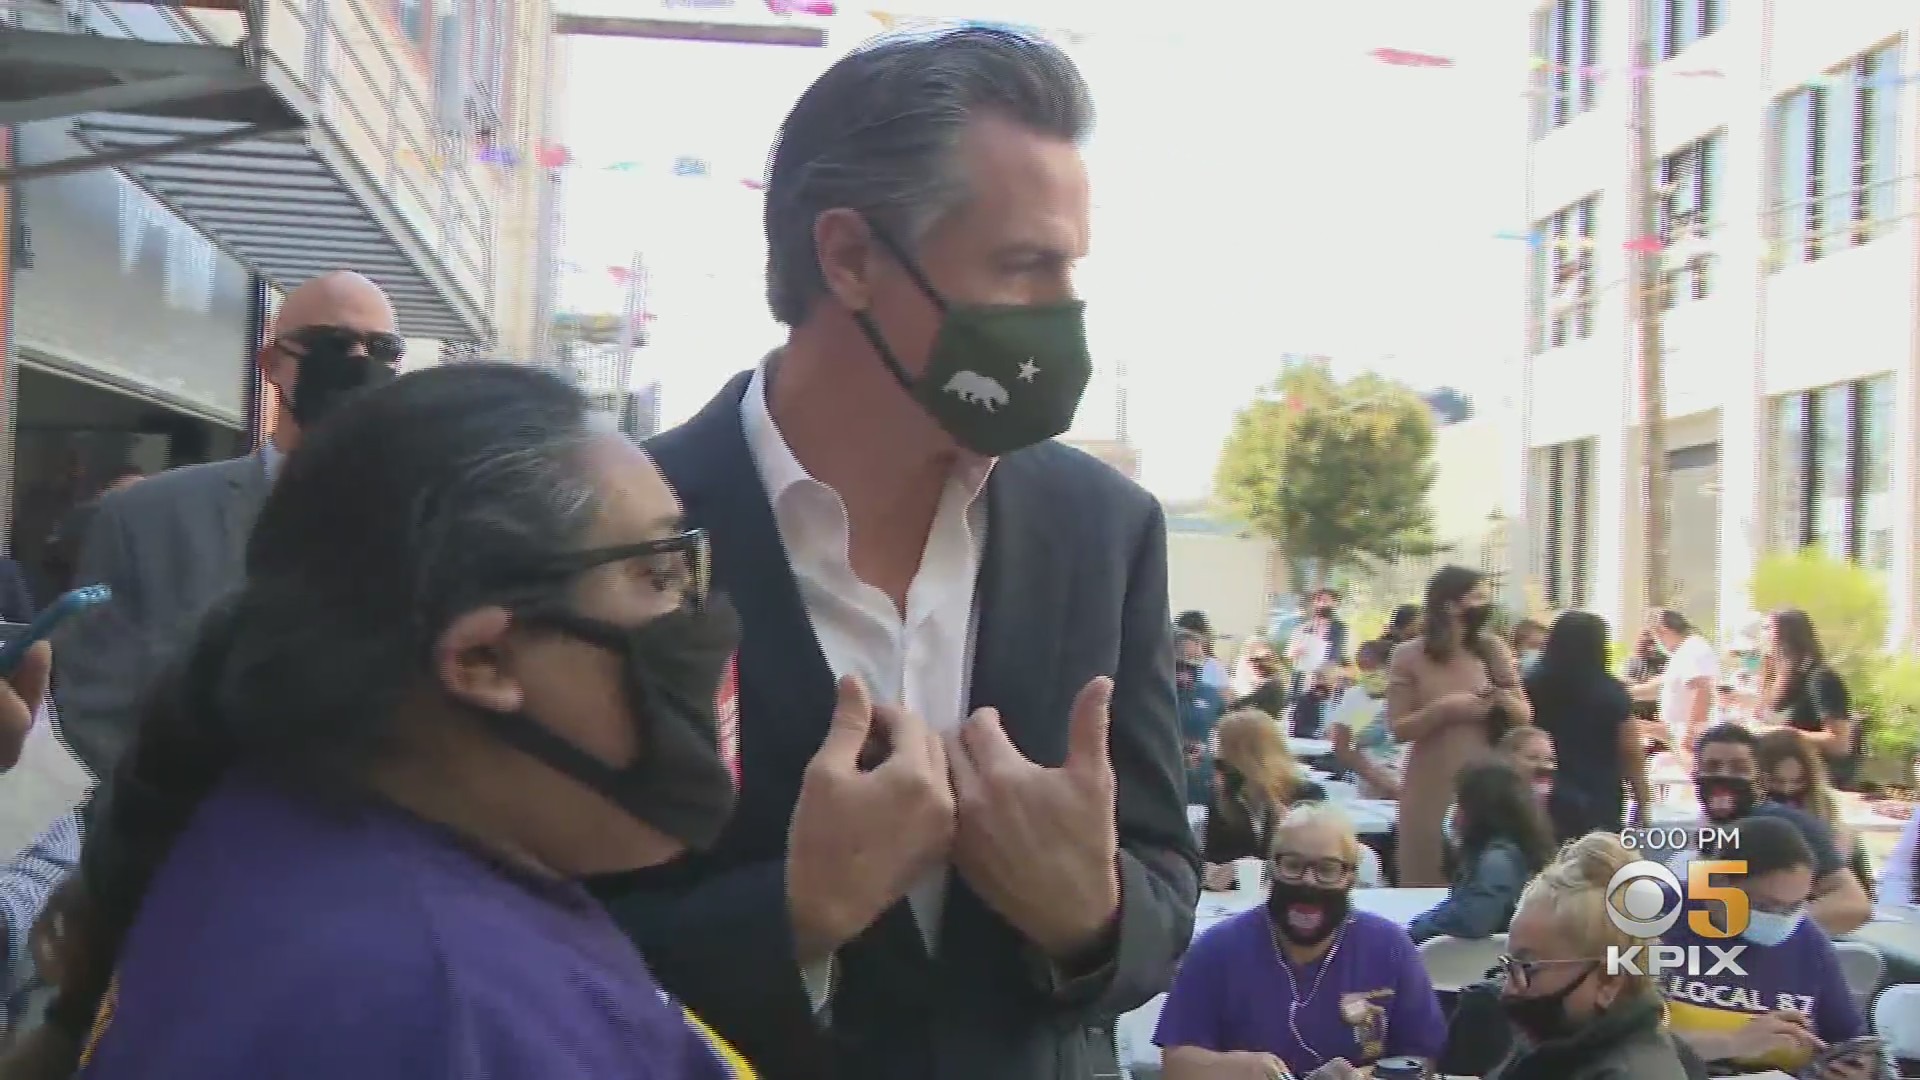 Newsom greets supporters in a campaign event in San Francisco's Mission District on September 7, 2021, one week before the recall election against him. (CBS)